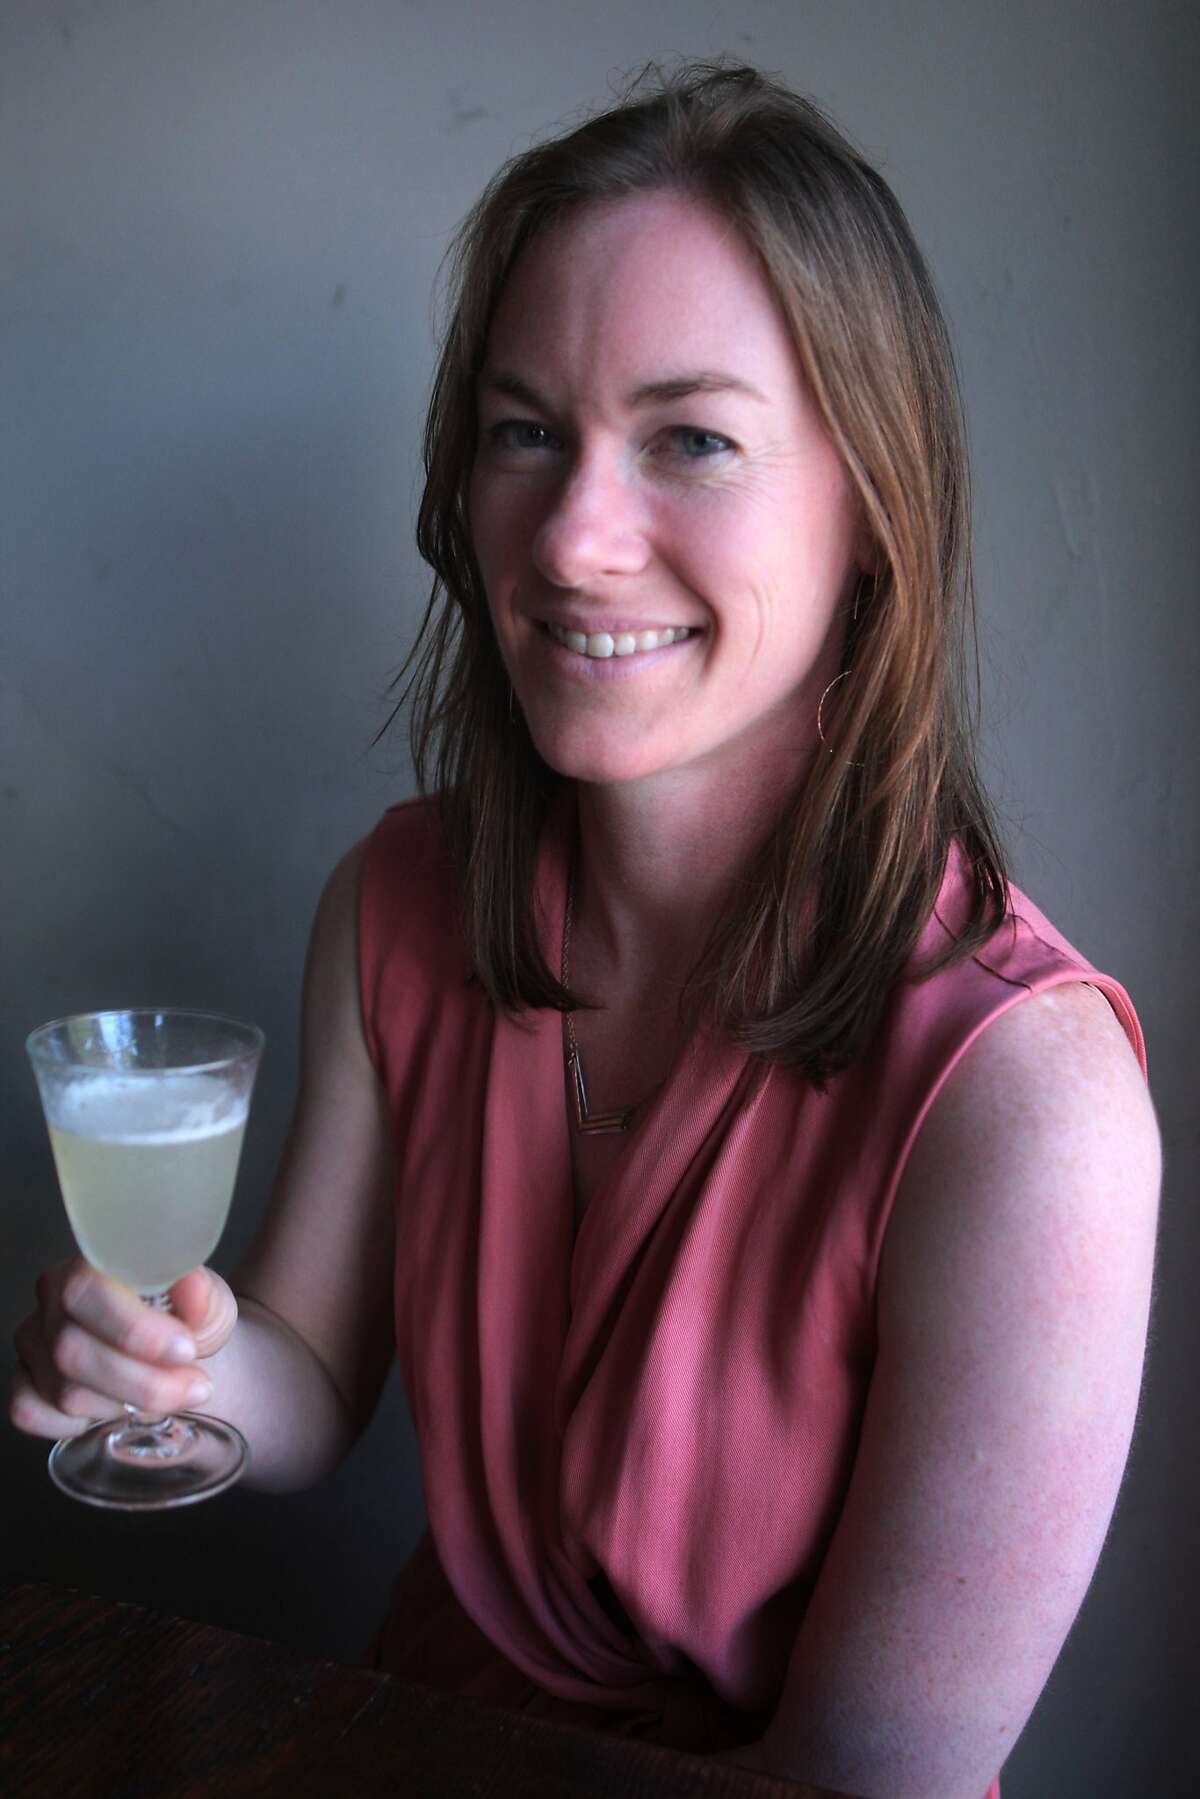 Historian Shanna Farrell holds a Pisco Punch, a cocktail invented in San Francisco in the 19th century at the East Bay Spice Company bar and restaurant in Berkeley, Calif. on Monday, June 9, 2014. Farrell is doing an oral history project on West Coast cocktails for the Regional Oral History Office at UC Berkeley's Bancroft Library.